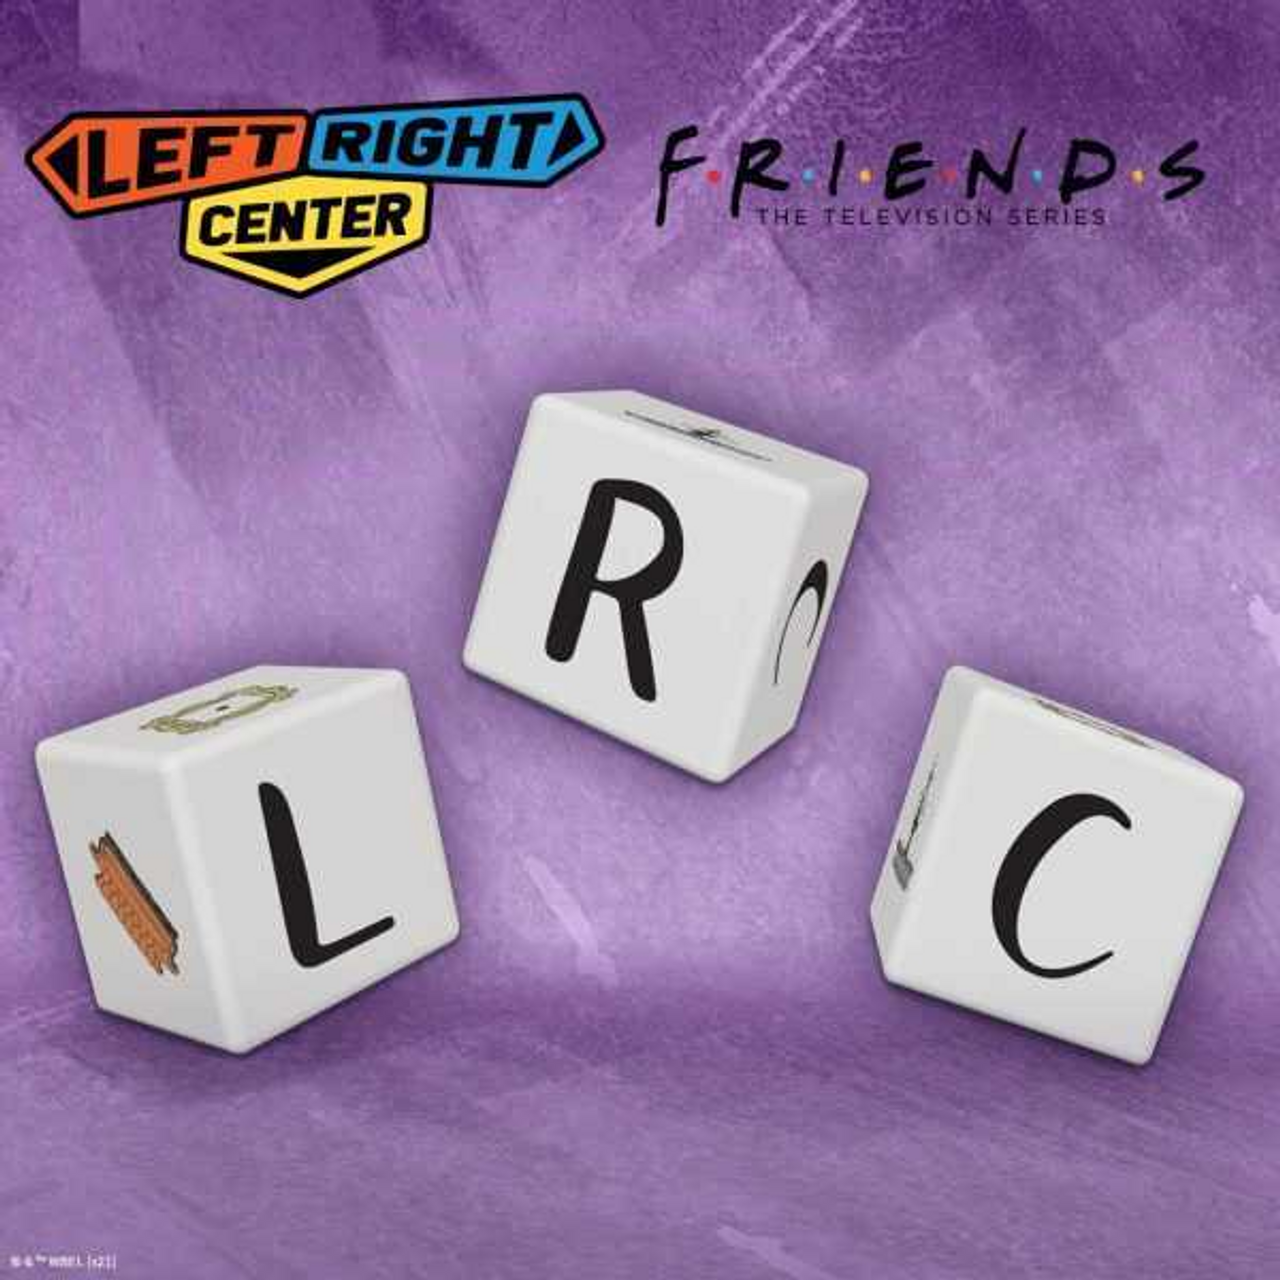 Friends Left Right Center Game